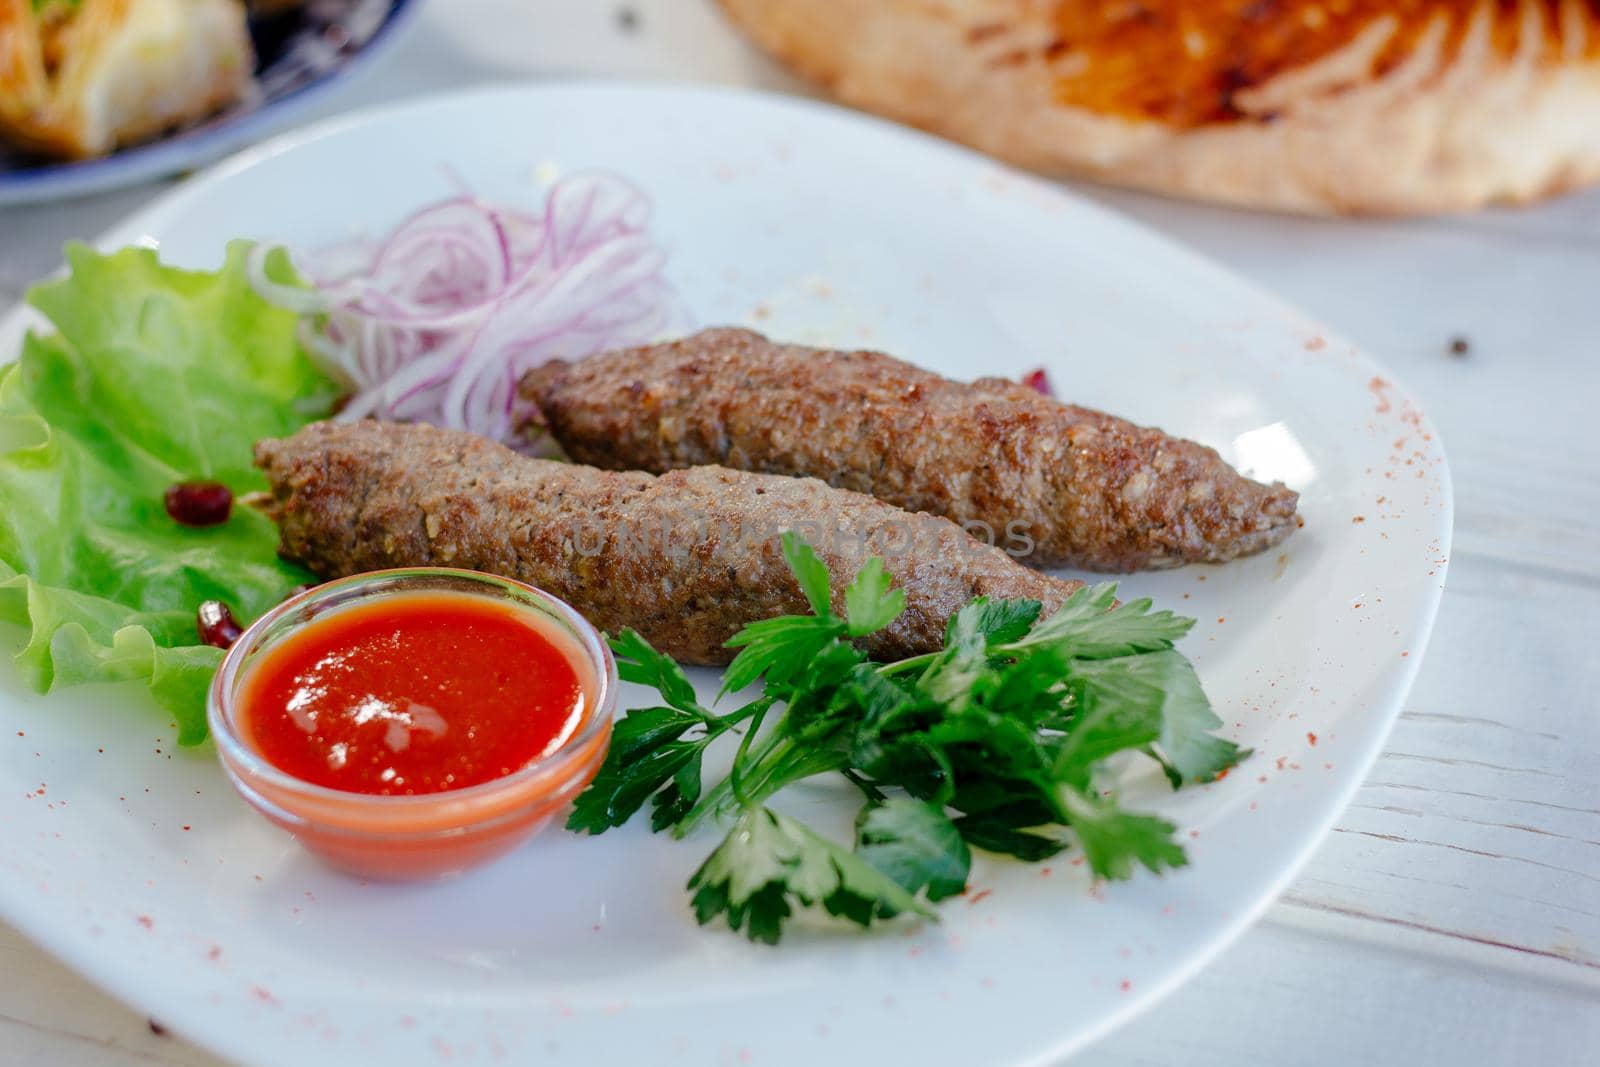 Meat kebabs on white plate with green herbs and red sauce, great image for your needs.